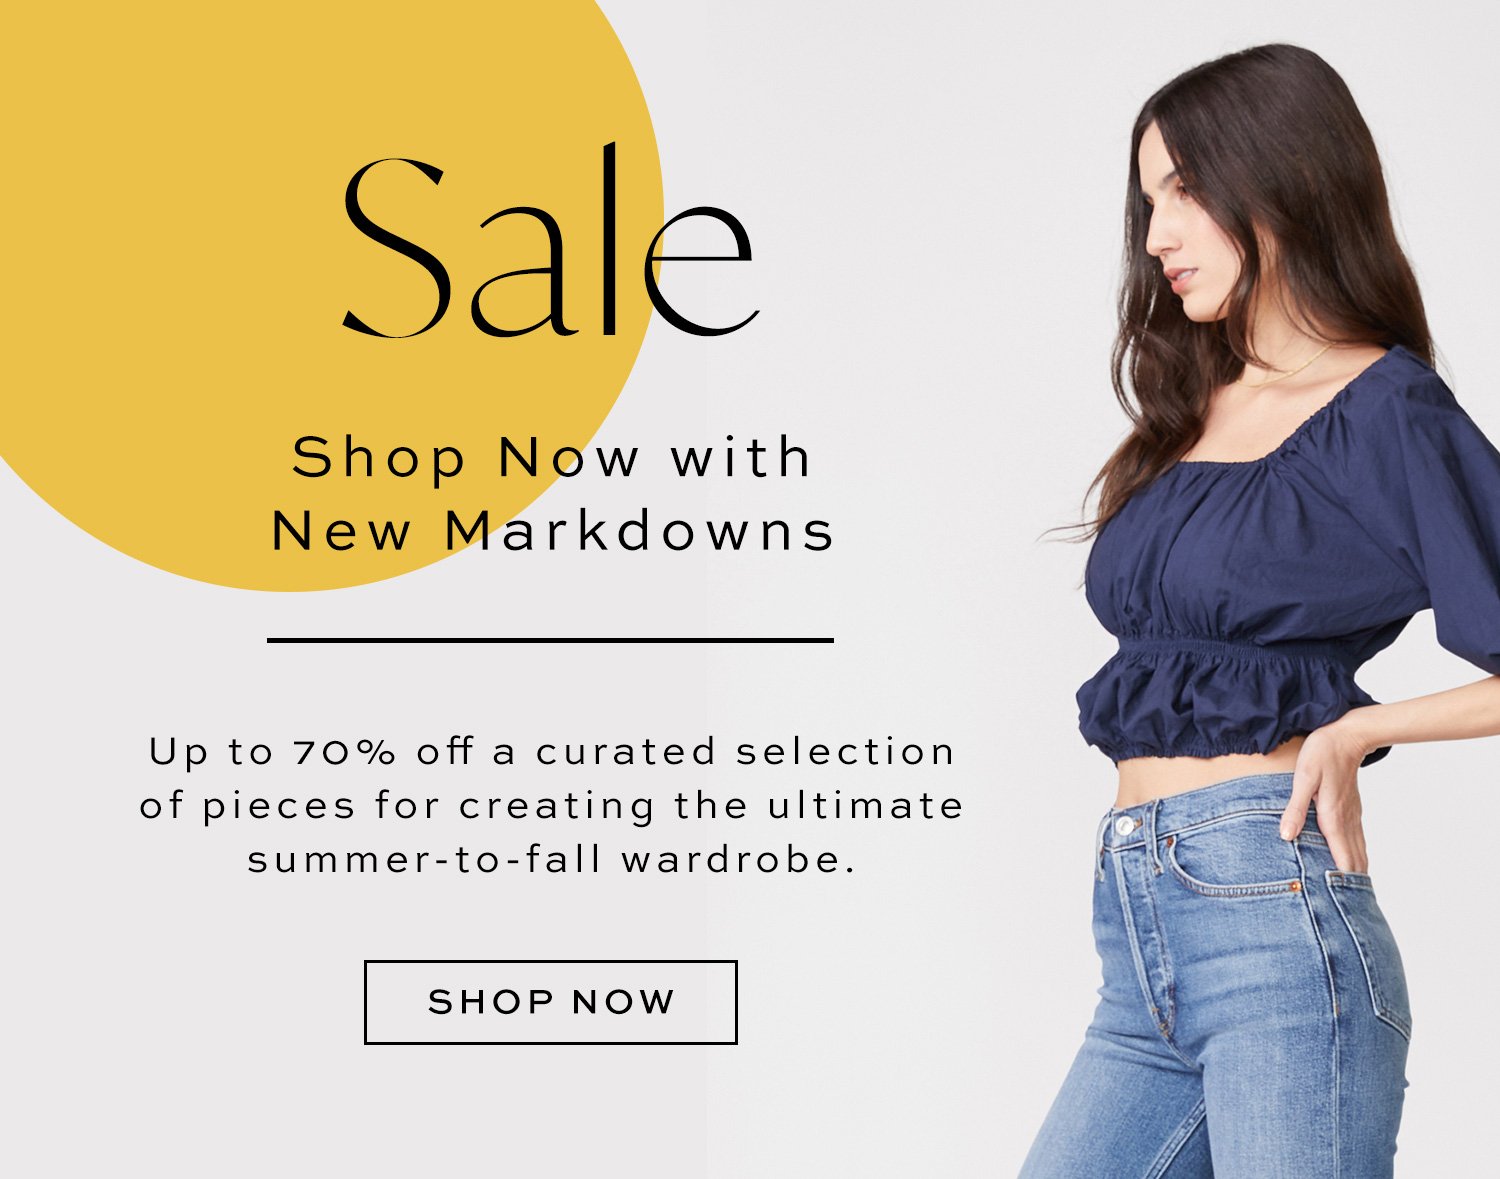 Sale - Shop Now with New Markdowns